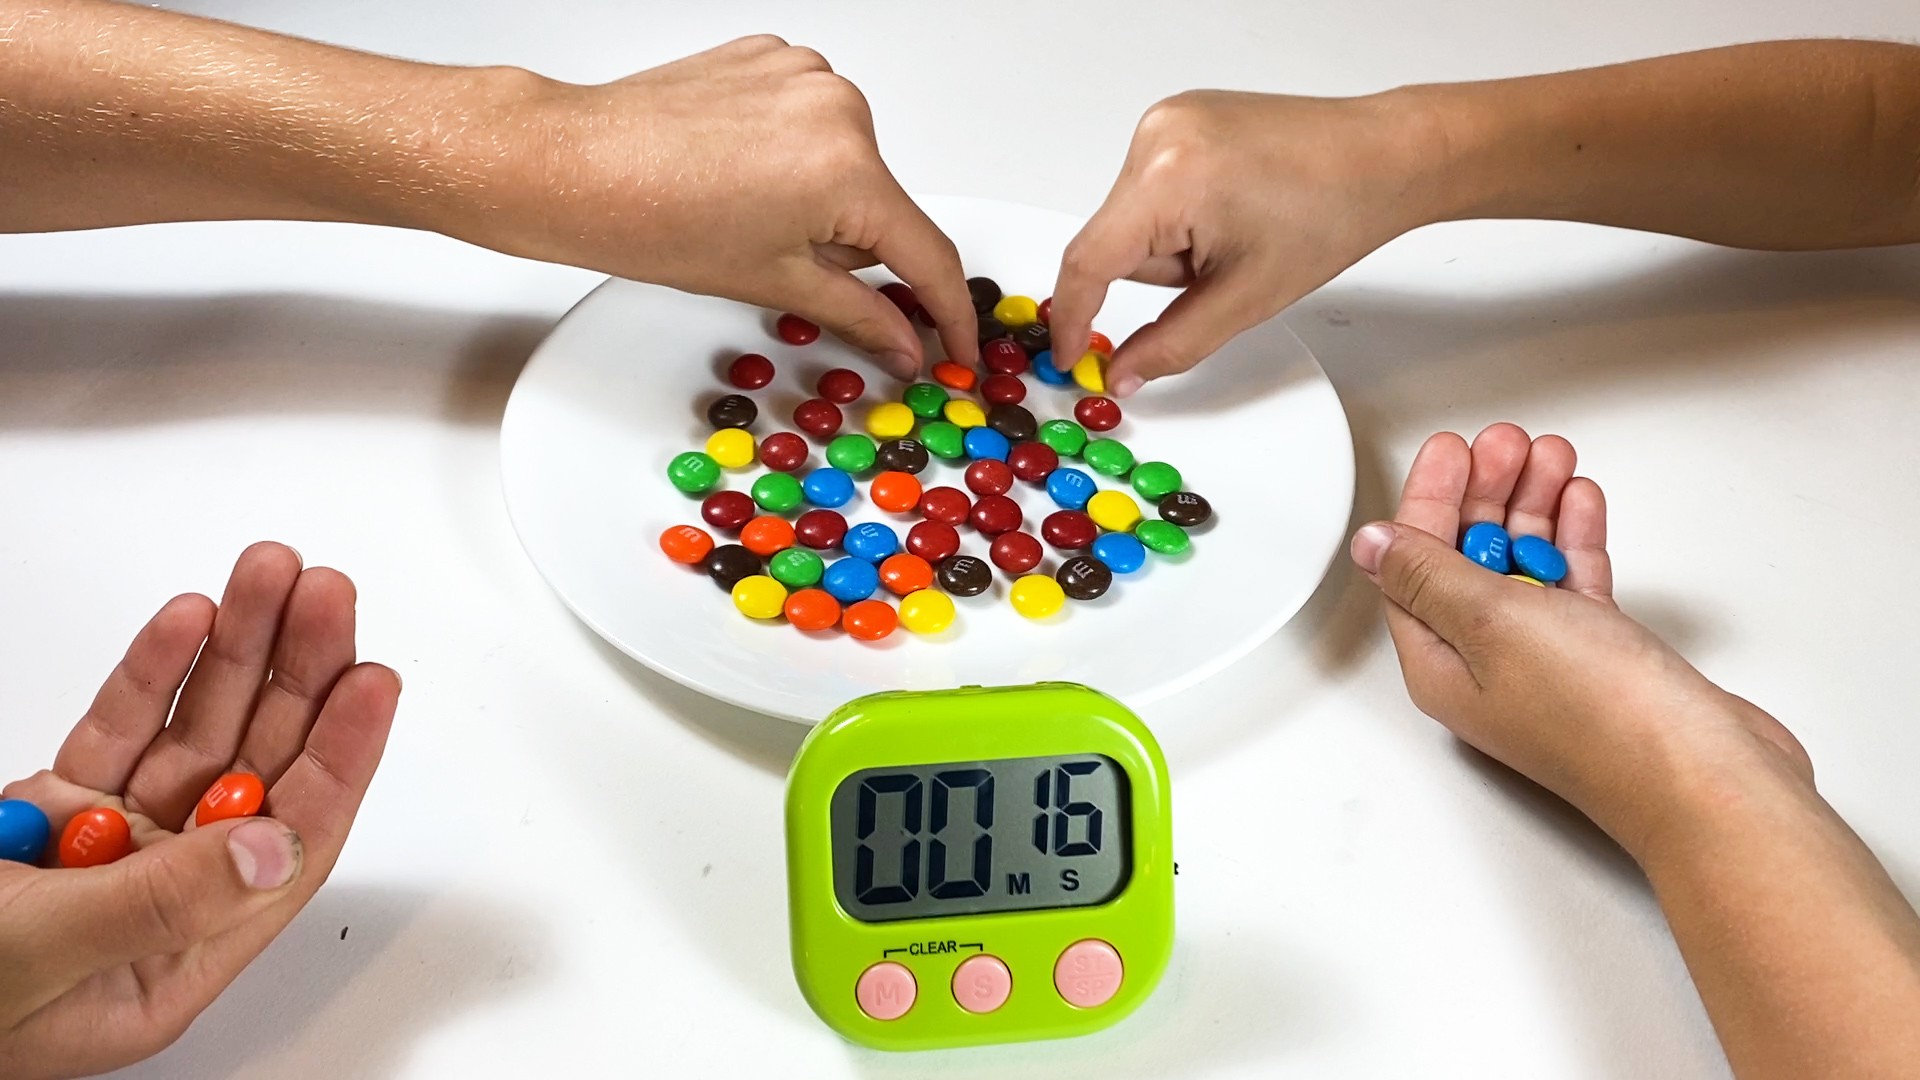 Multiple hands pick up M&M candies off of a plate with a timer set